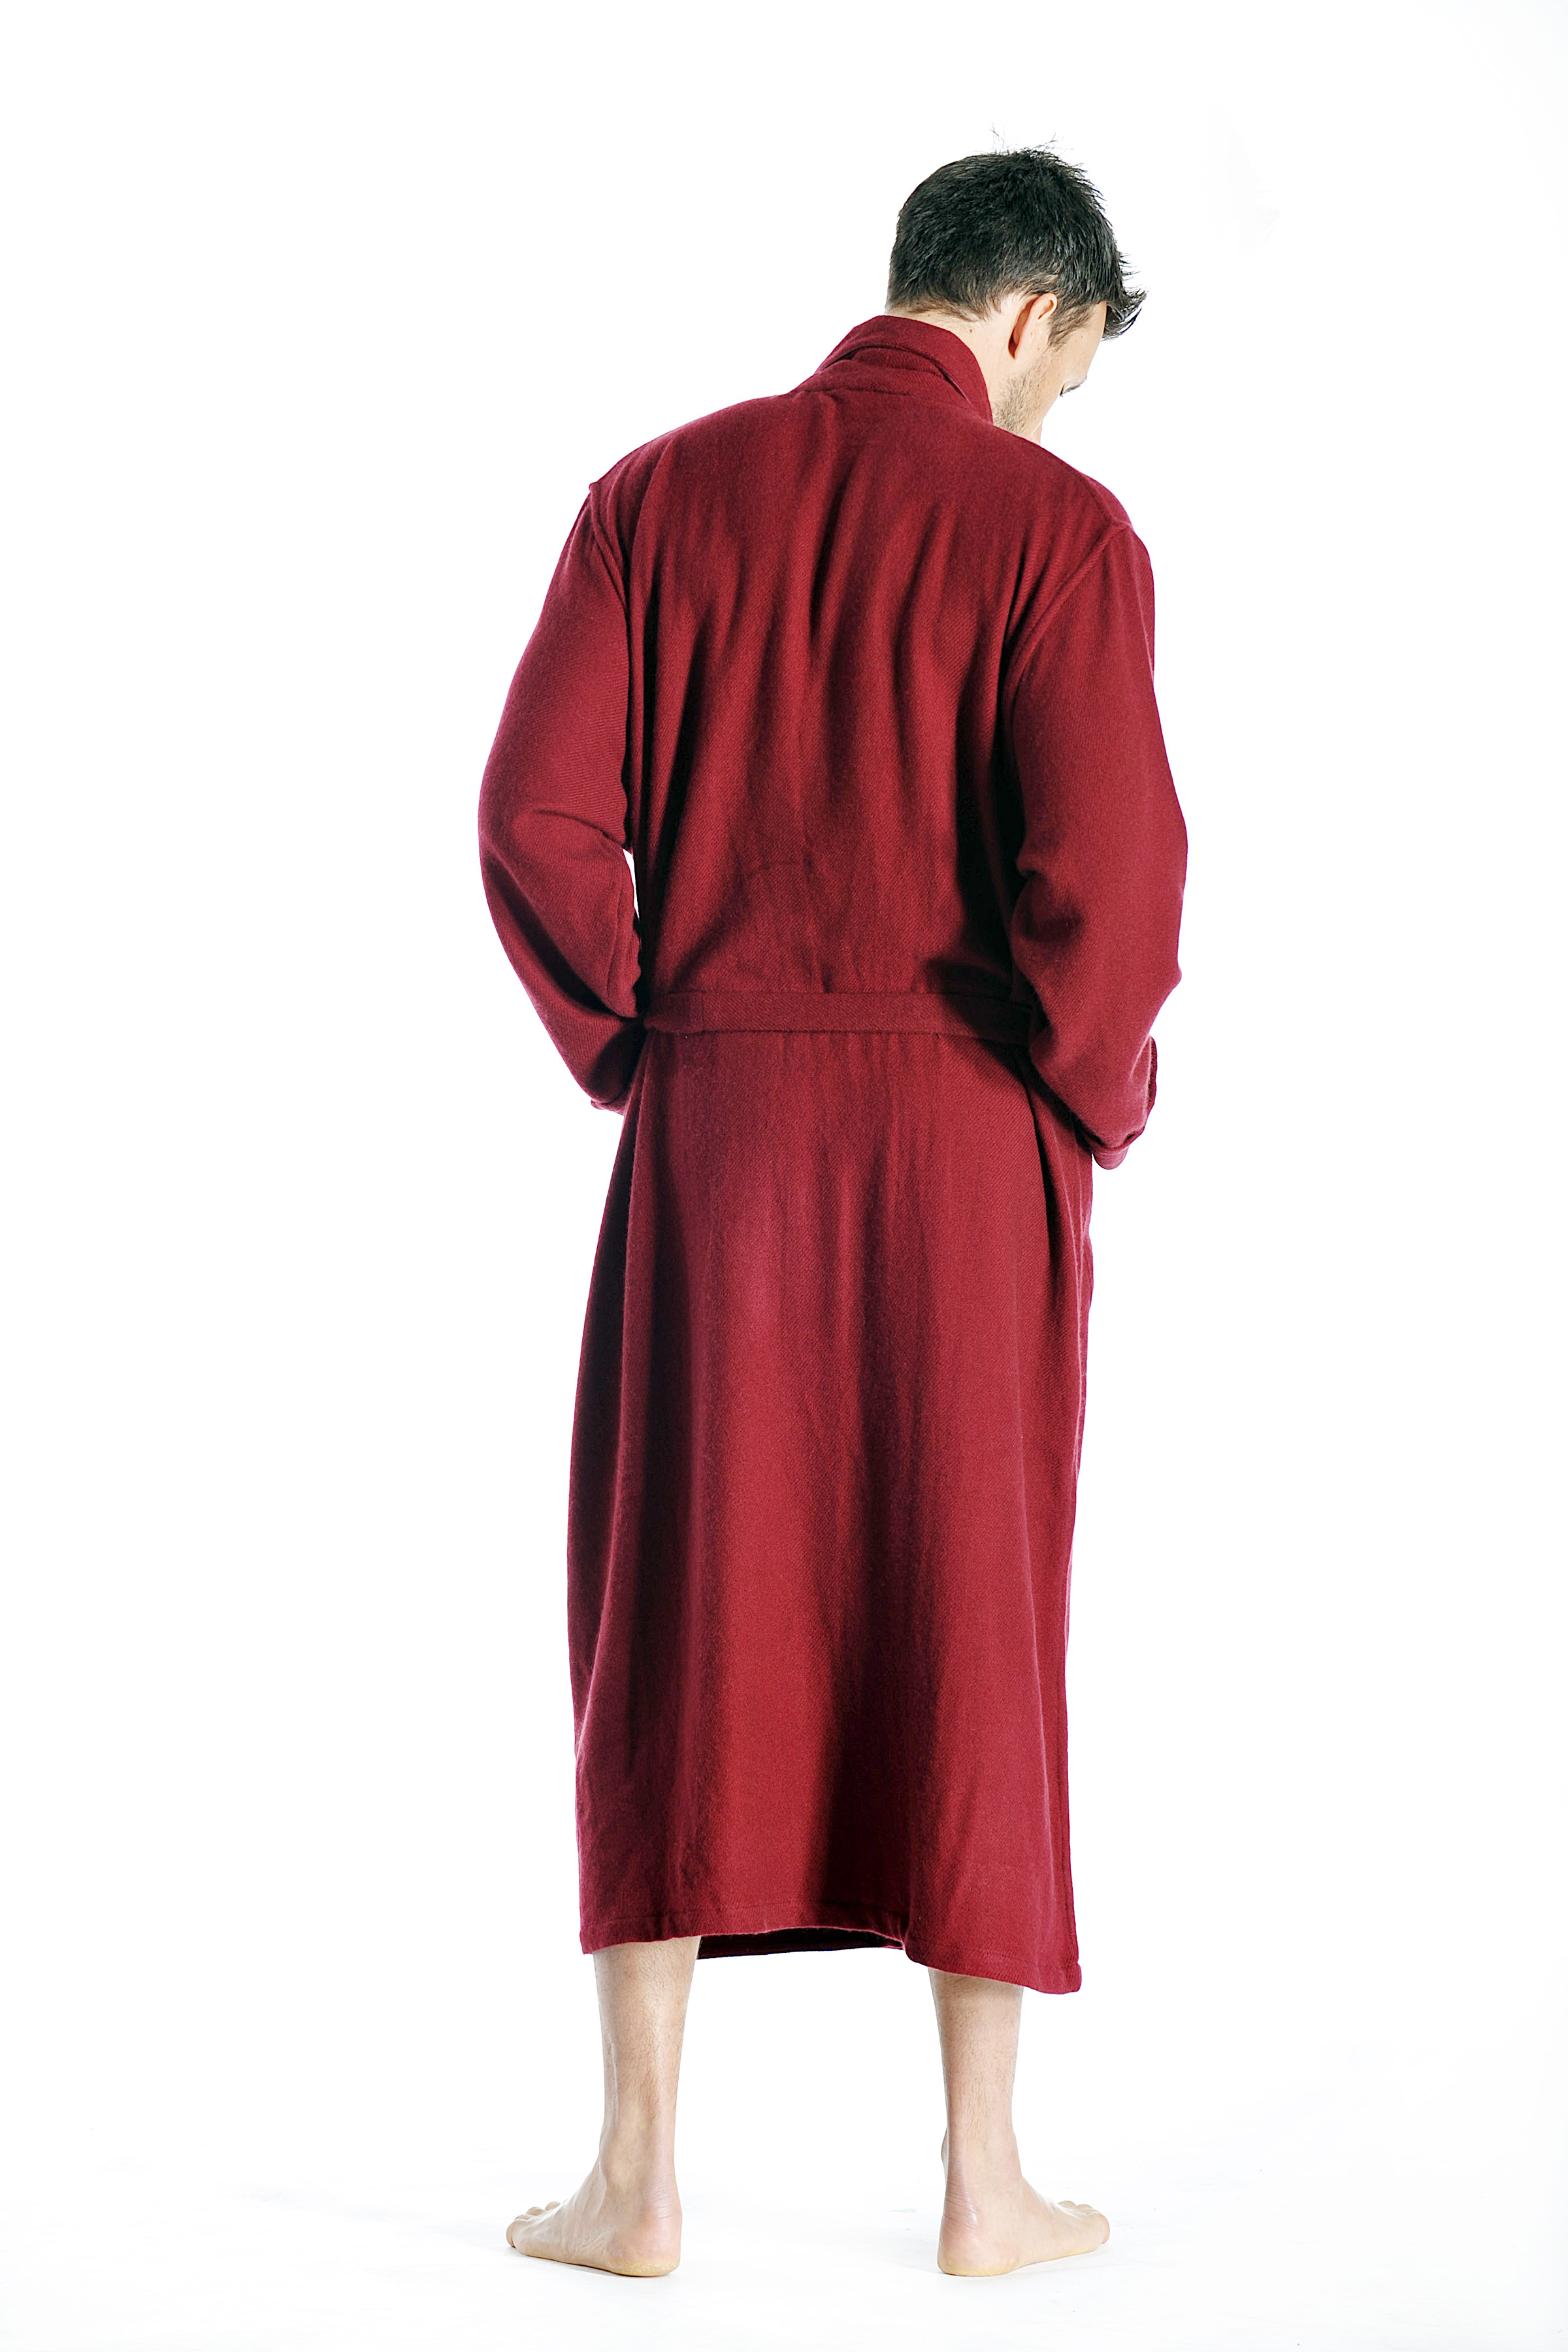 Pure Cashmere Full Length Robe for Men (Camel, Large/Extra Large)